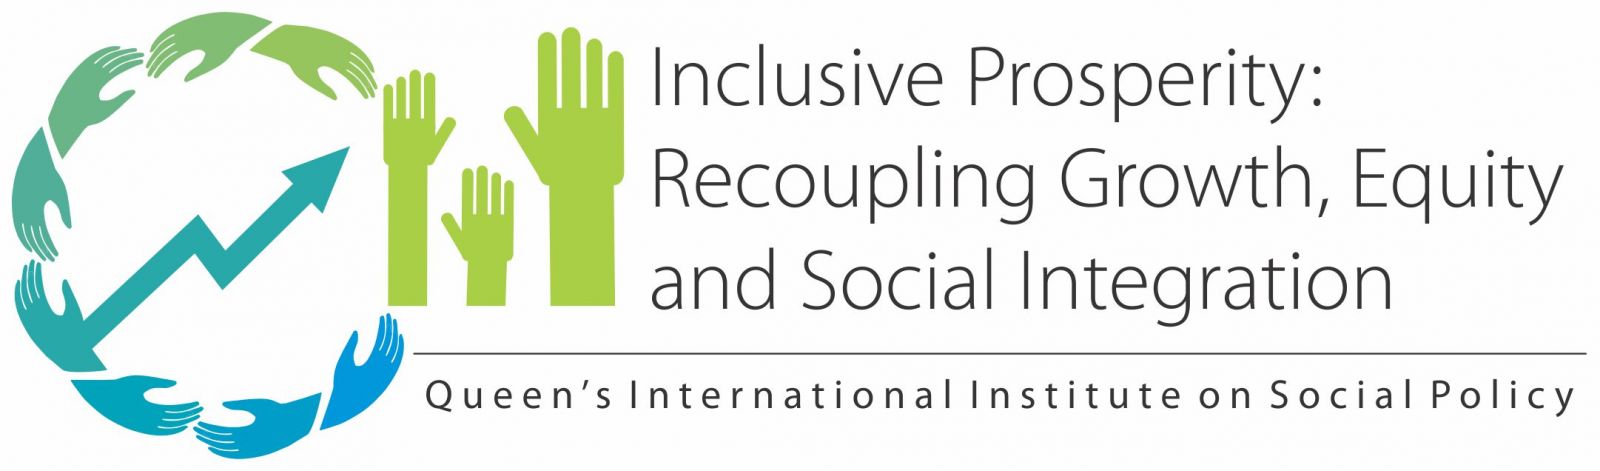 2019: Inclusive Prosperity: Recoupling Growth, Equity and Social Inclusion